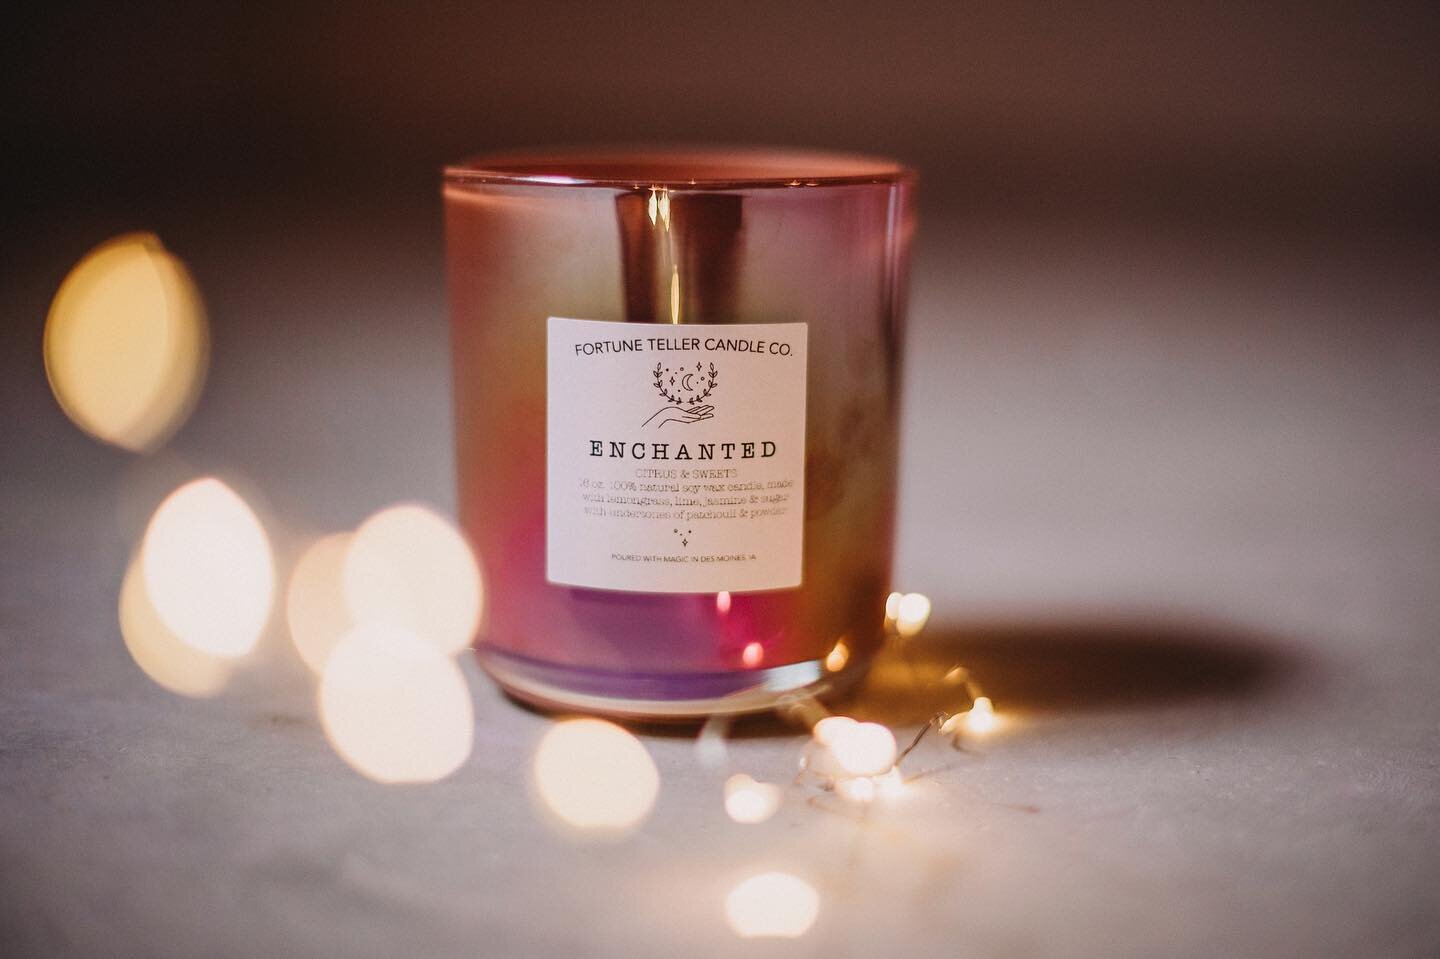 The ENCHANTED Collection
.
Fortune Teller Candle Co. has released our second full collection of scents. The ENCHANTED Collection consists of 100% natural, hand poured soy wax candles, mixed with LUXURY essential oils.
.
.
Introducing FIVE new scents 